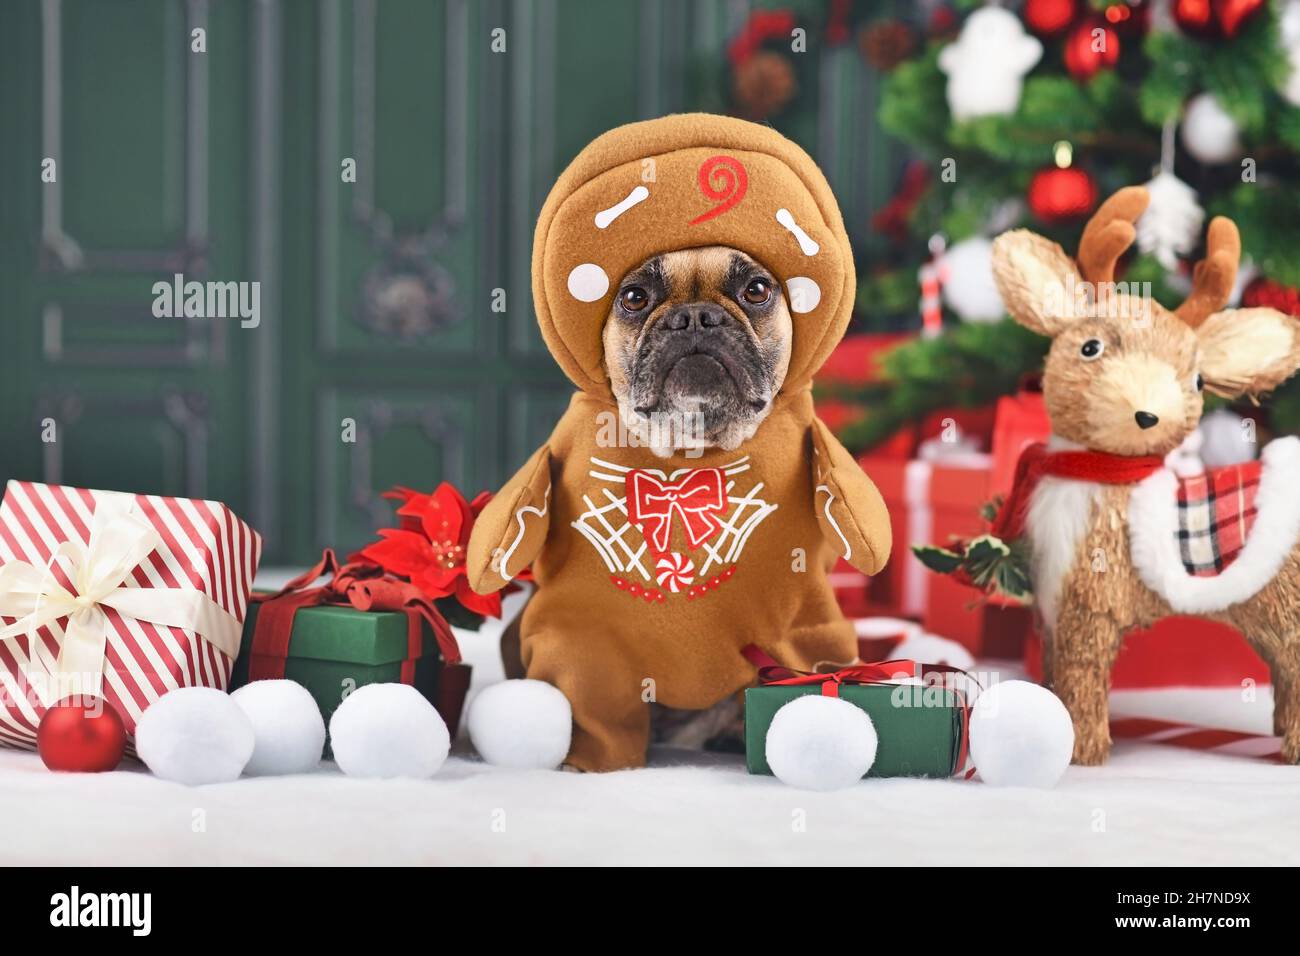 Funny dog Christmas costume. French Bulldog wearing gingerbread outfit with arms surrounded by festive decoration Stock Photo